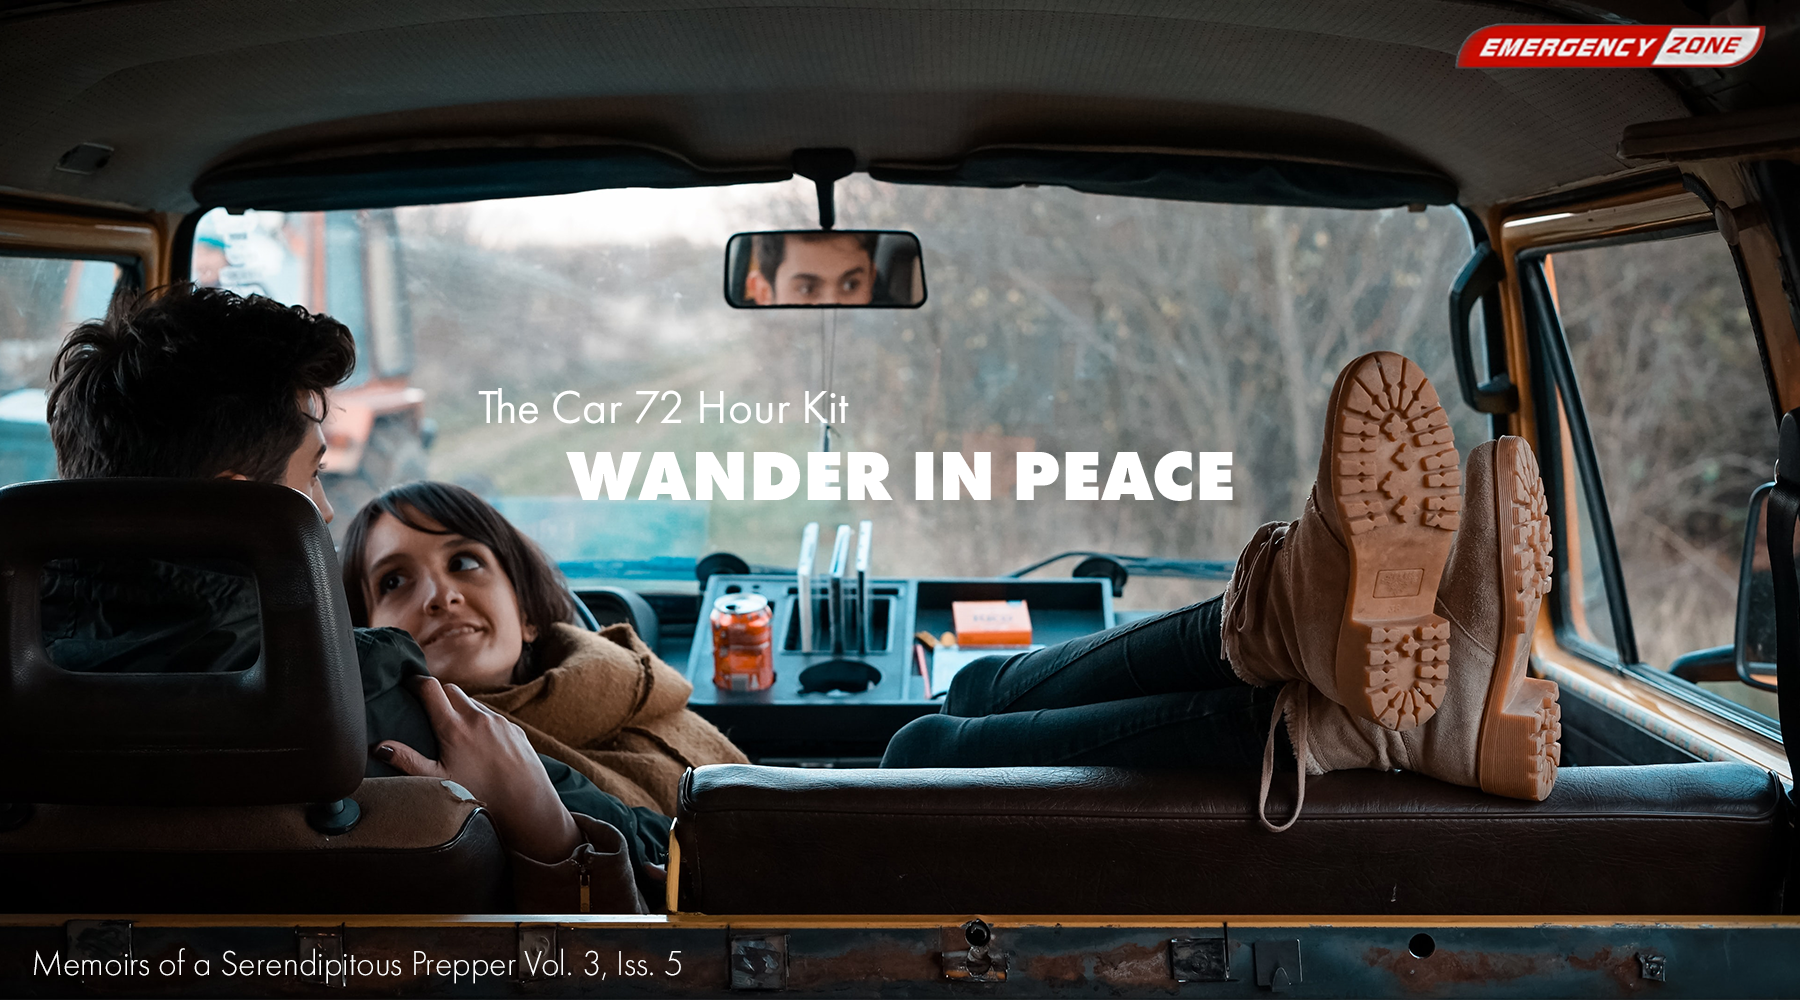 The Car 72 Hour Kit - Wander in Peace